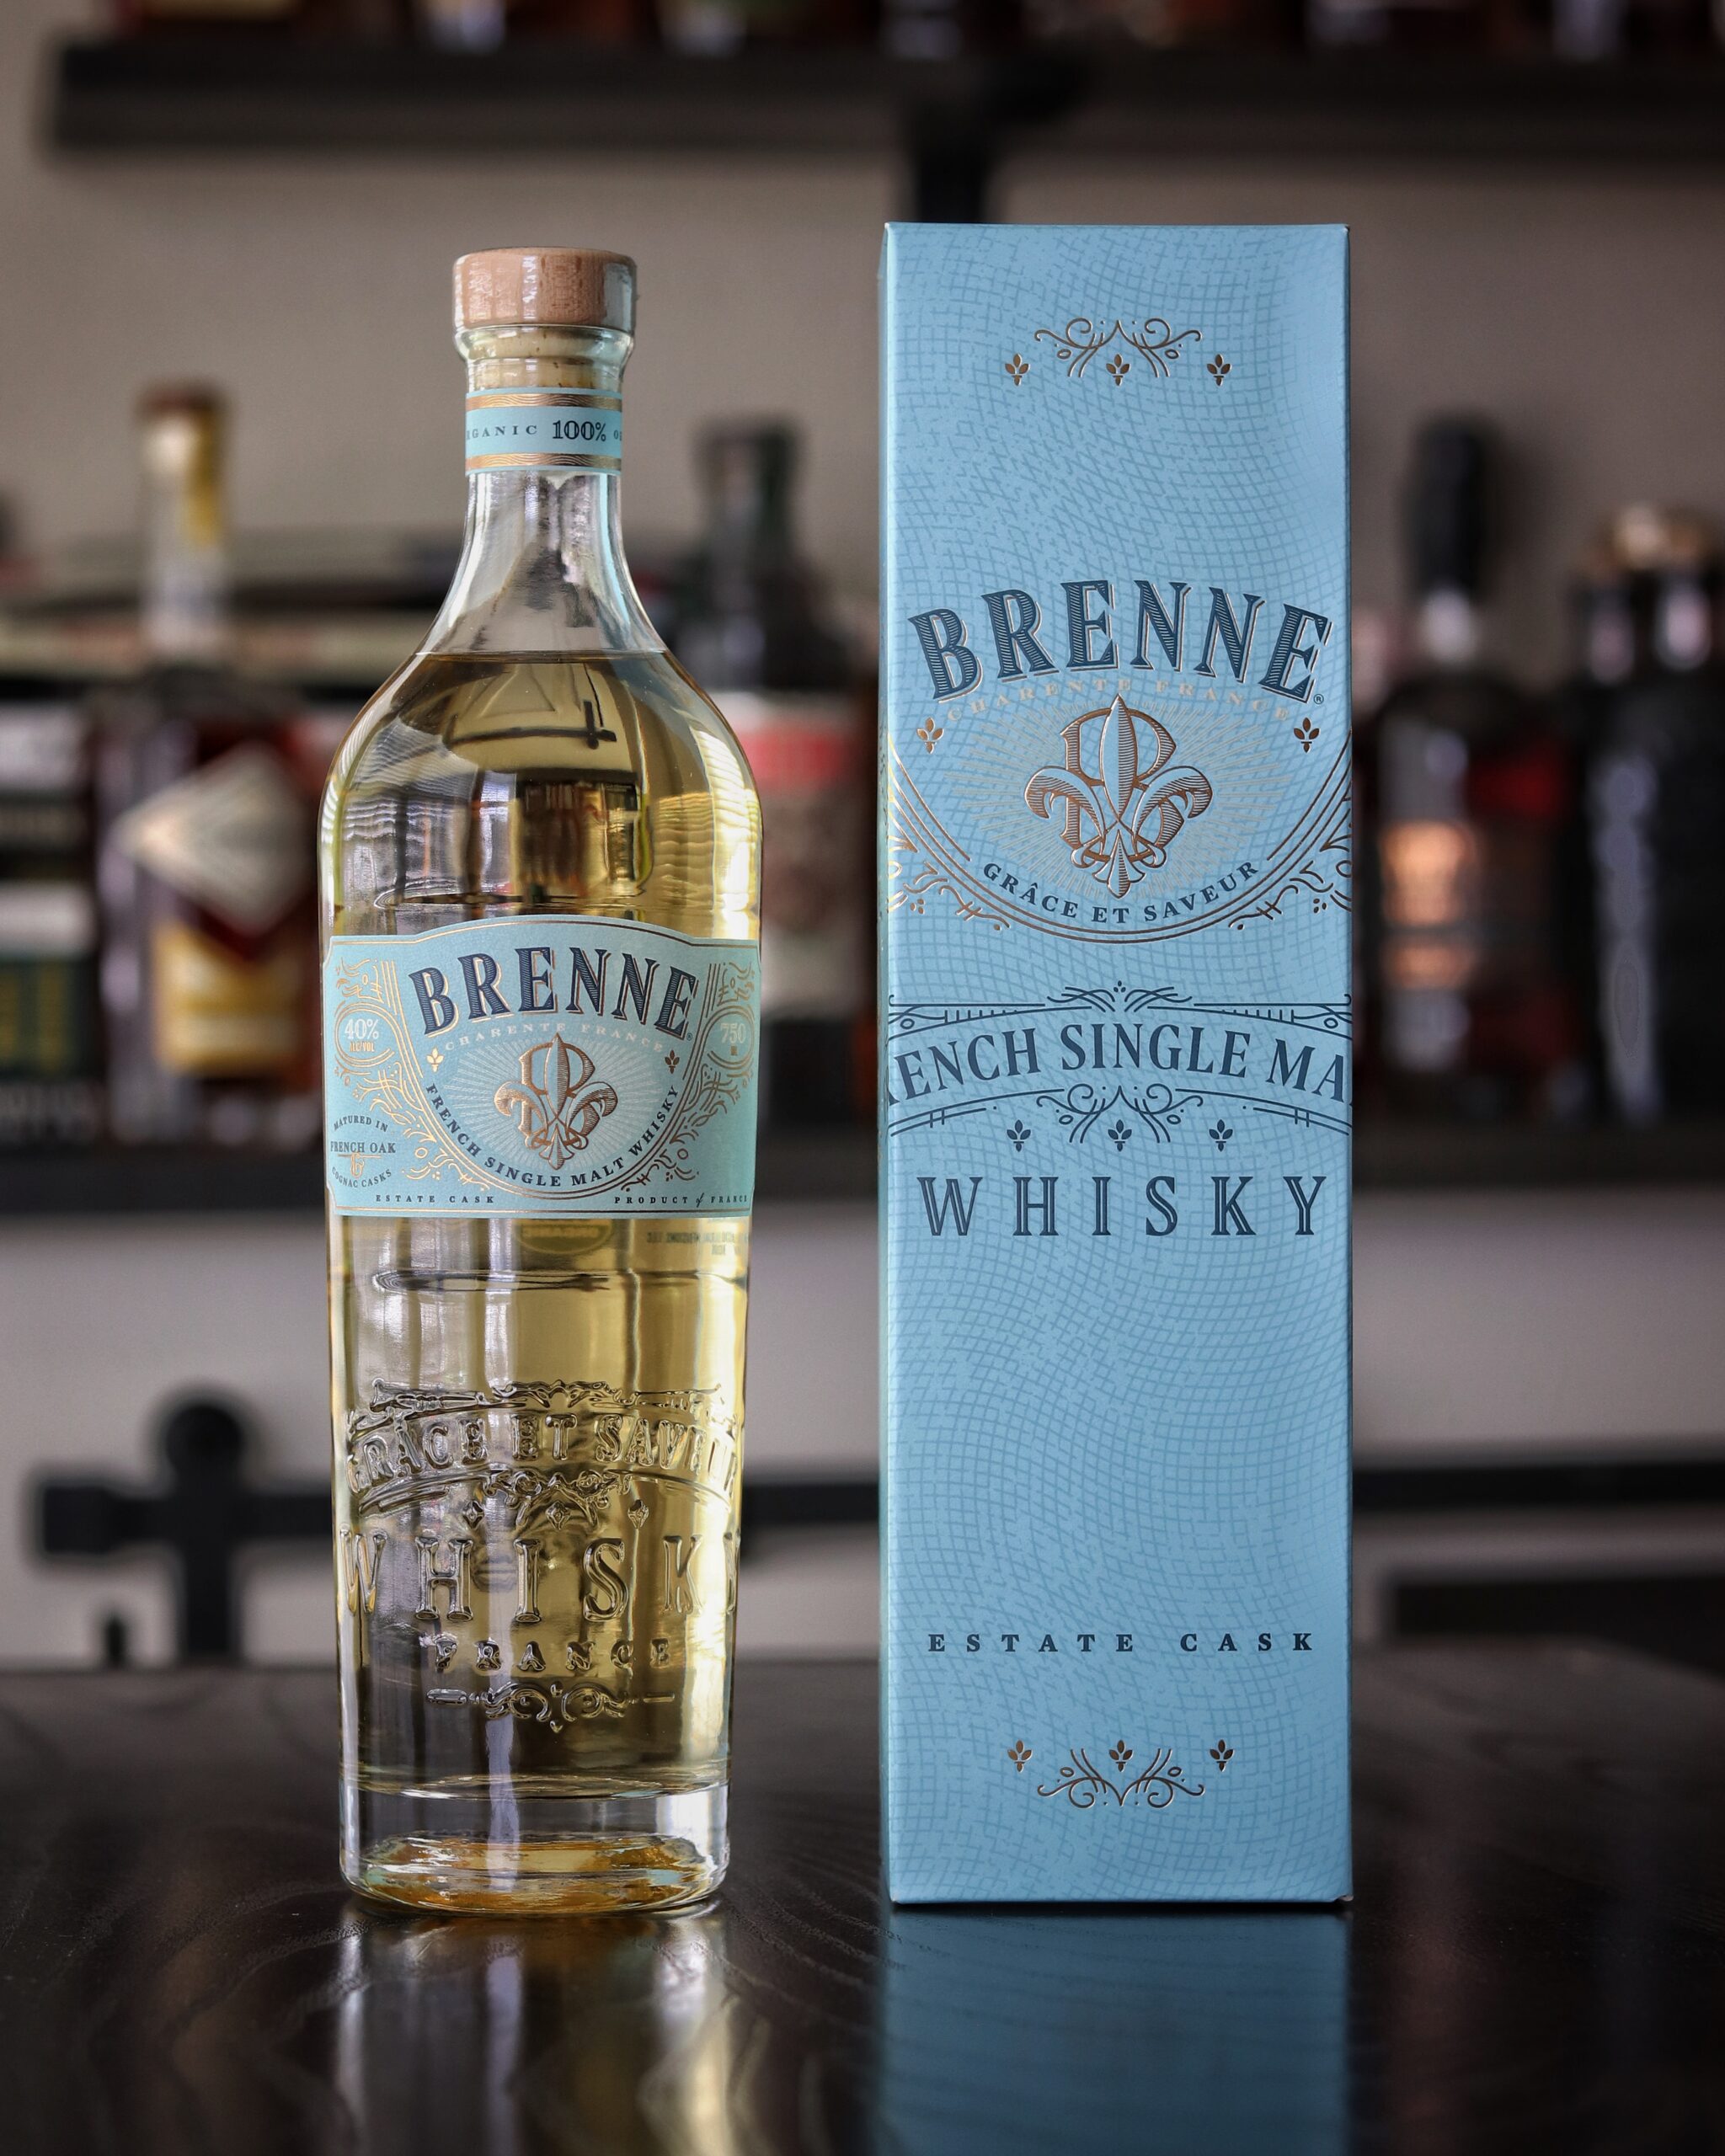 Brenne French Single Malt Whisky is a Unique to Experience